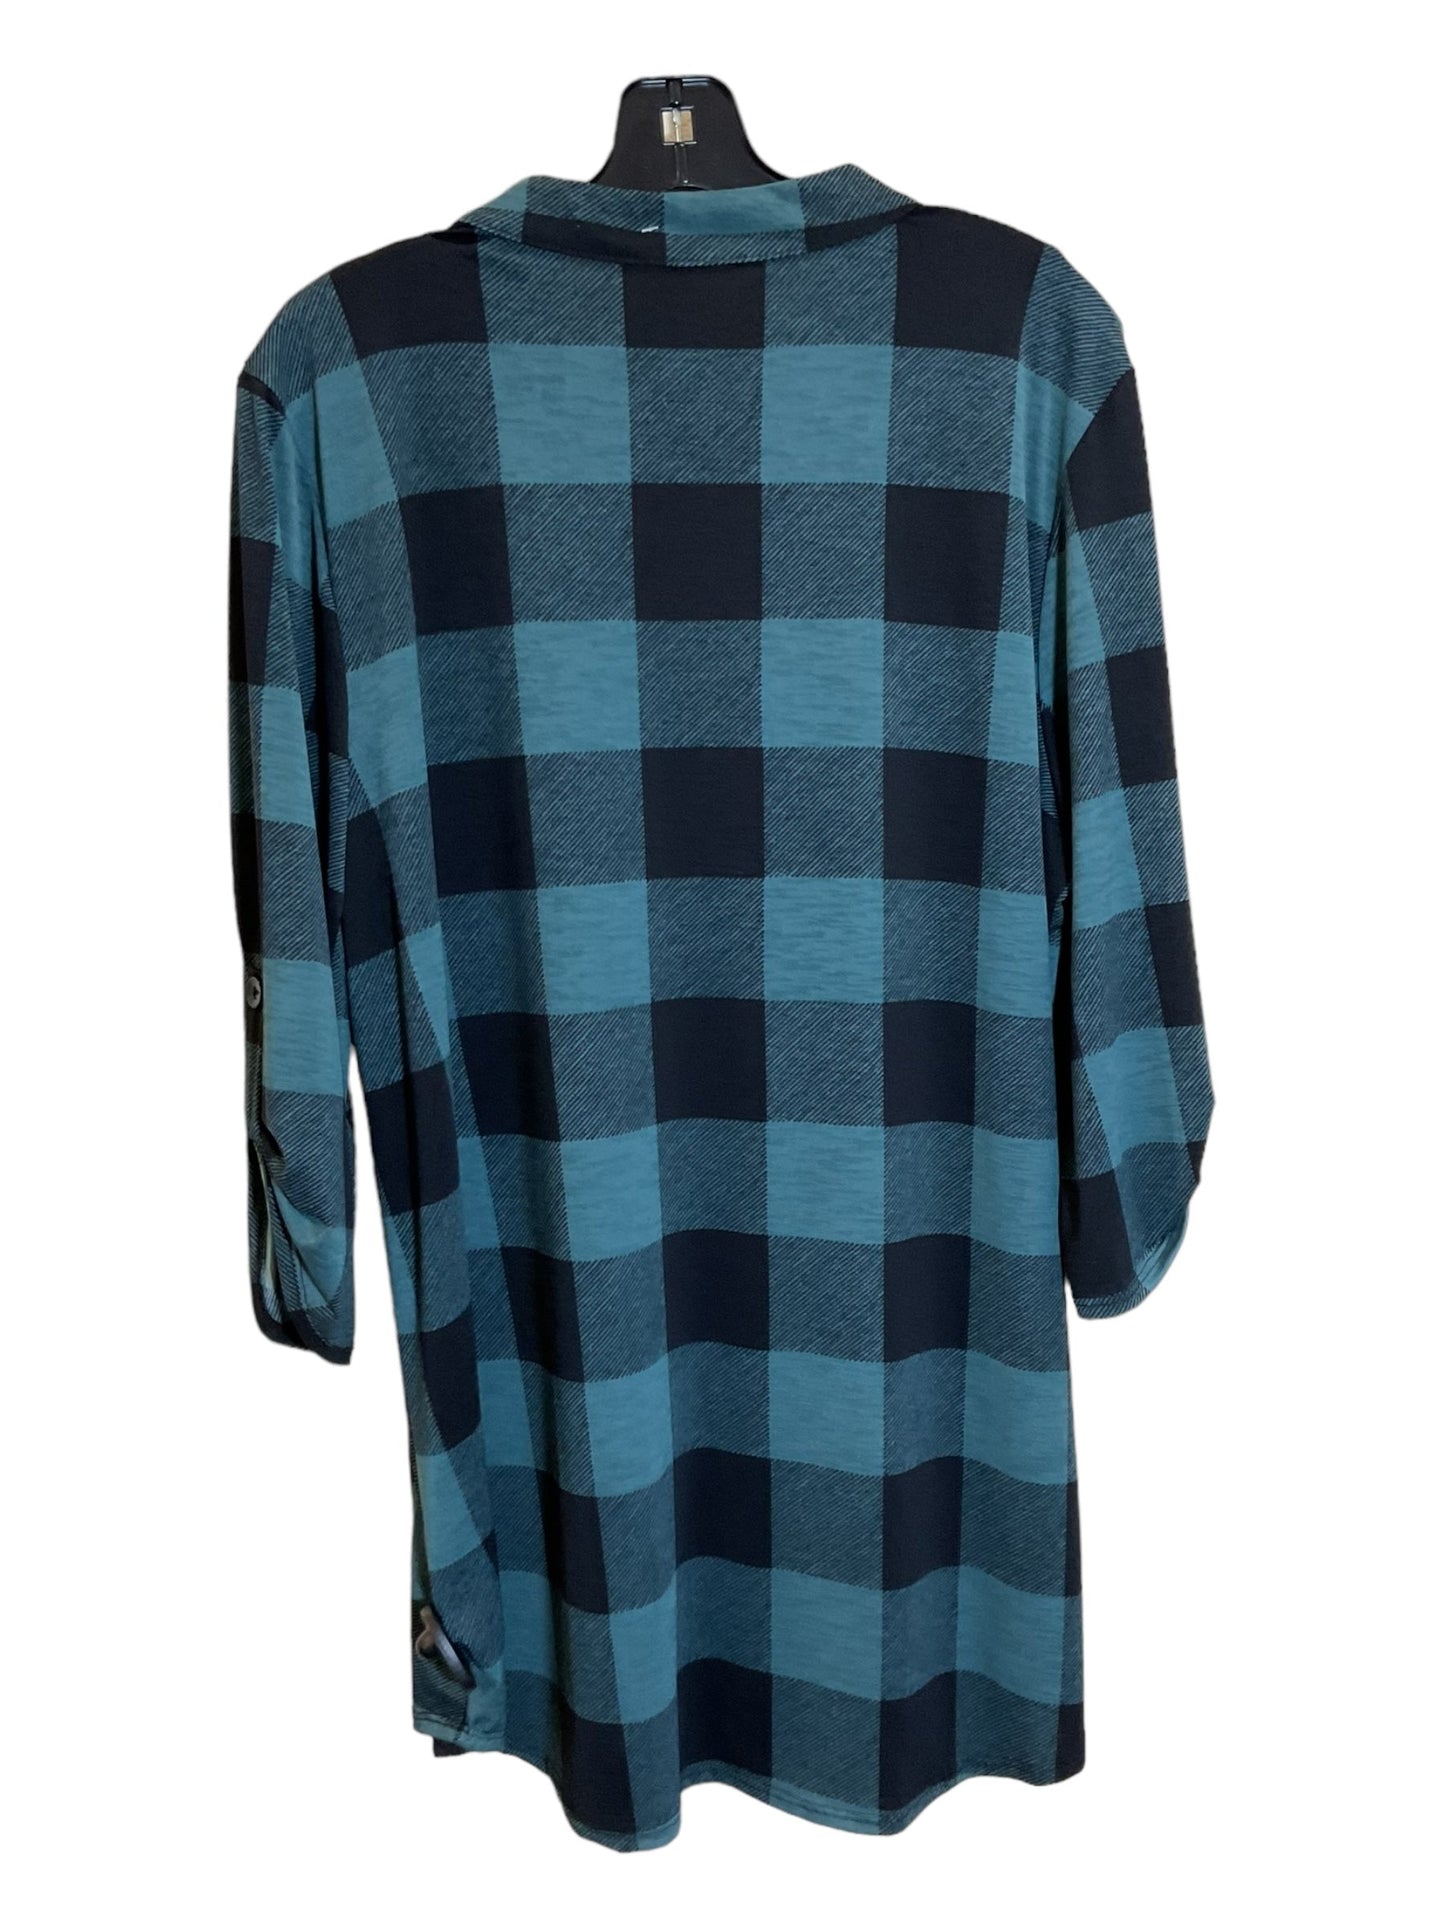 Plaid Pattern Tunic 3/4 Sleeve Clothes Mentor, Size 3x